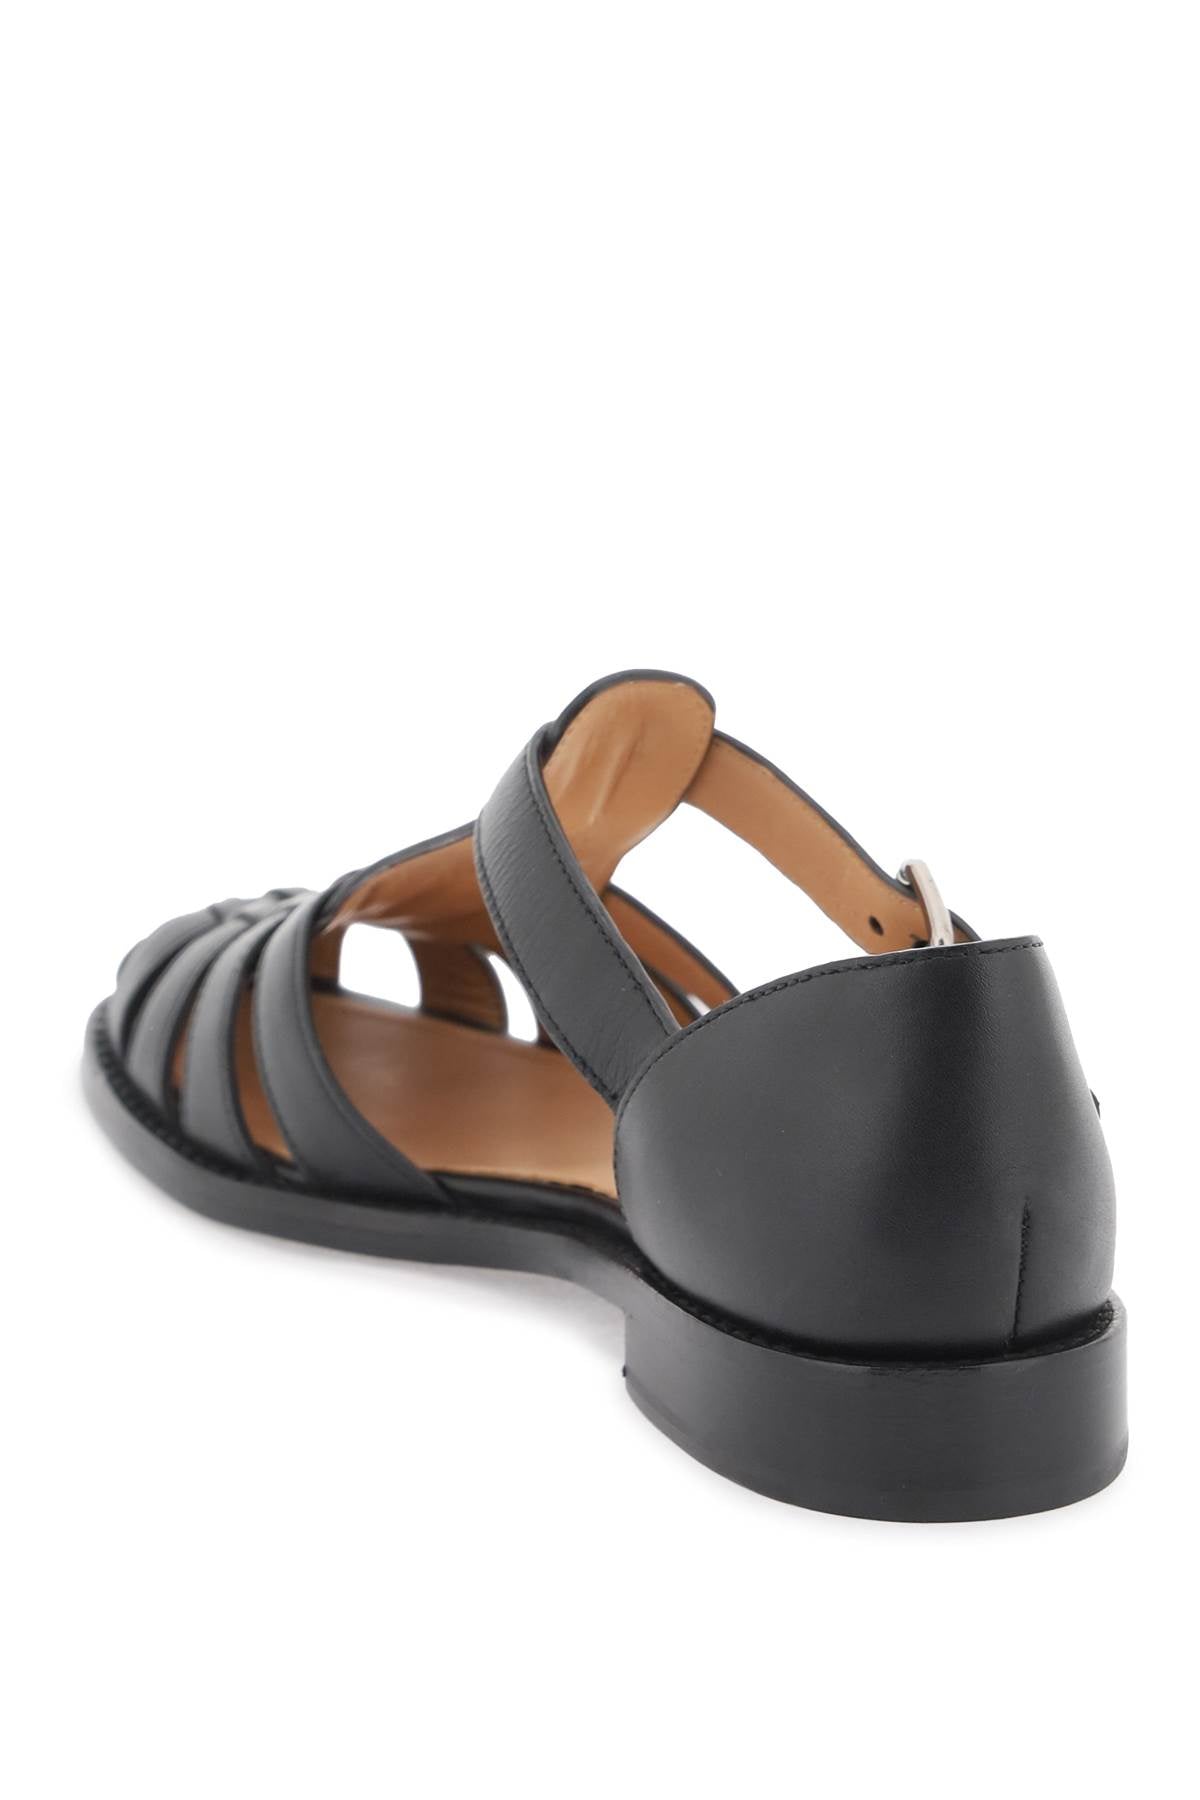 Church'S Church's kelsey cage sandals